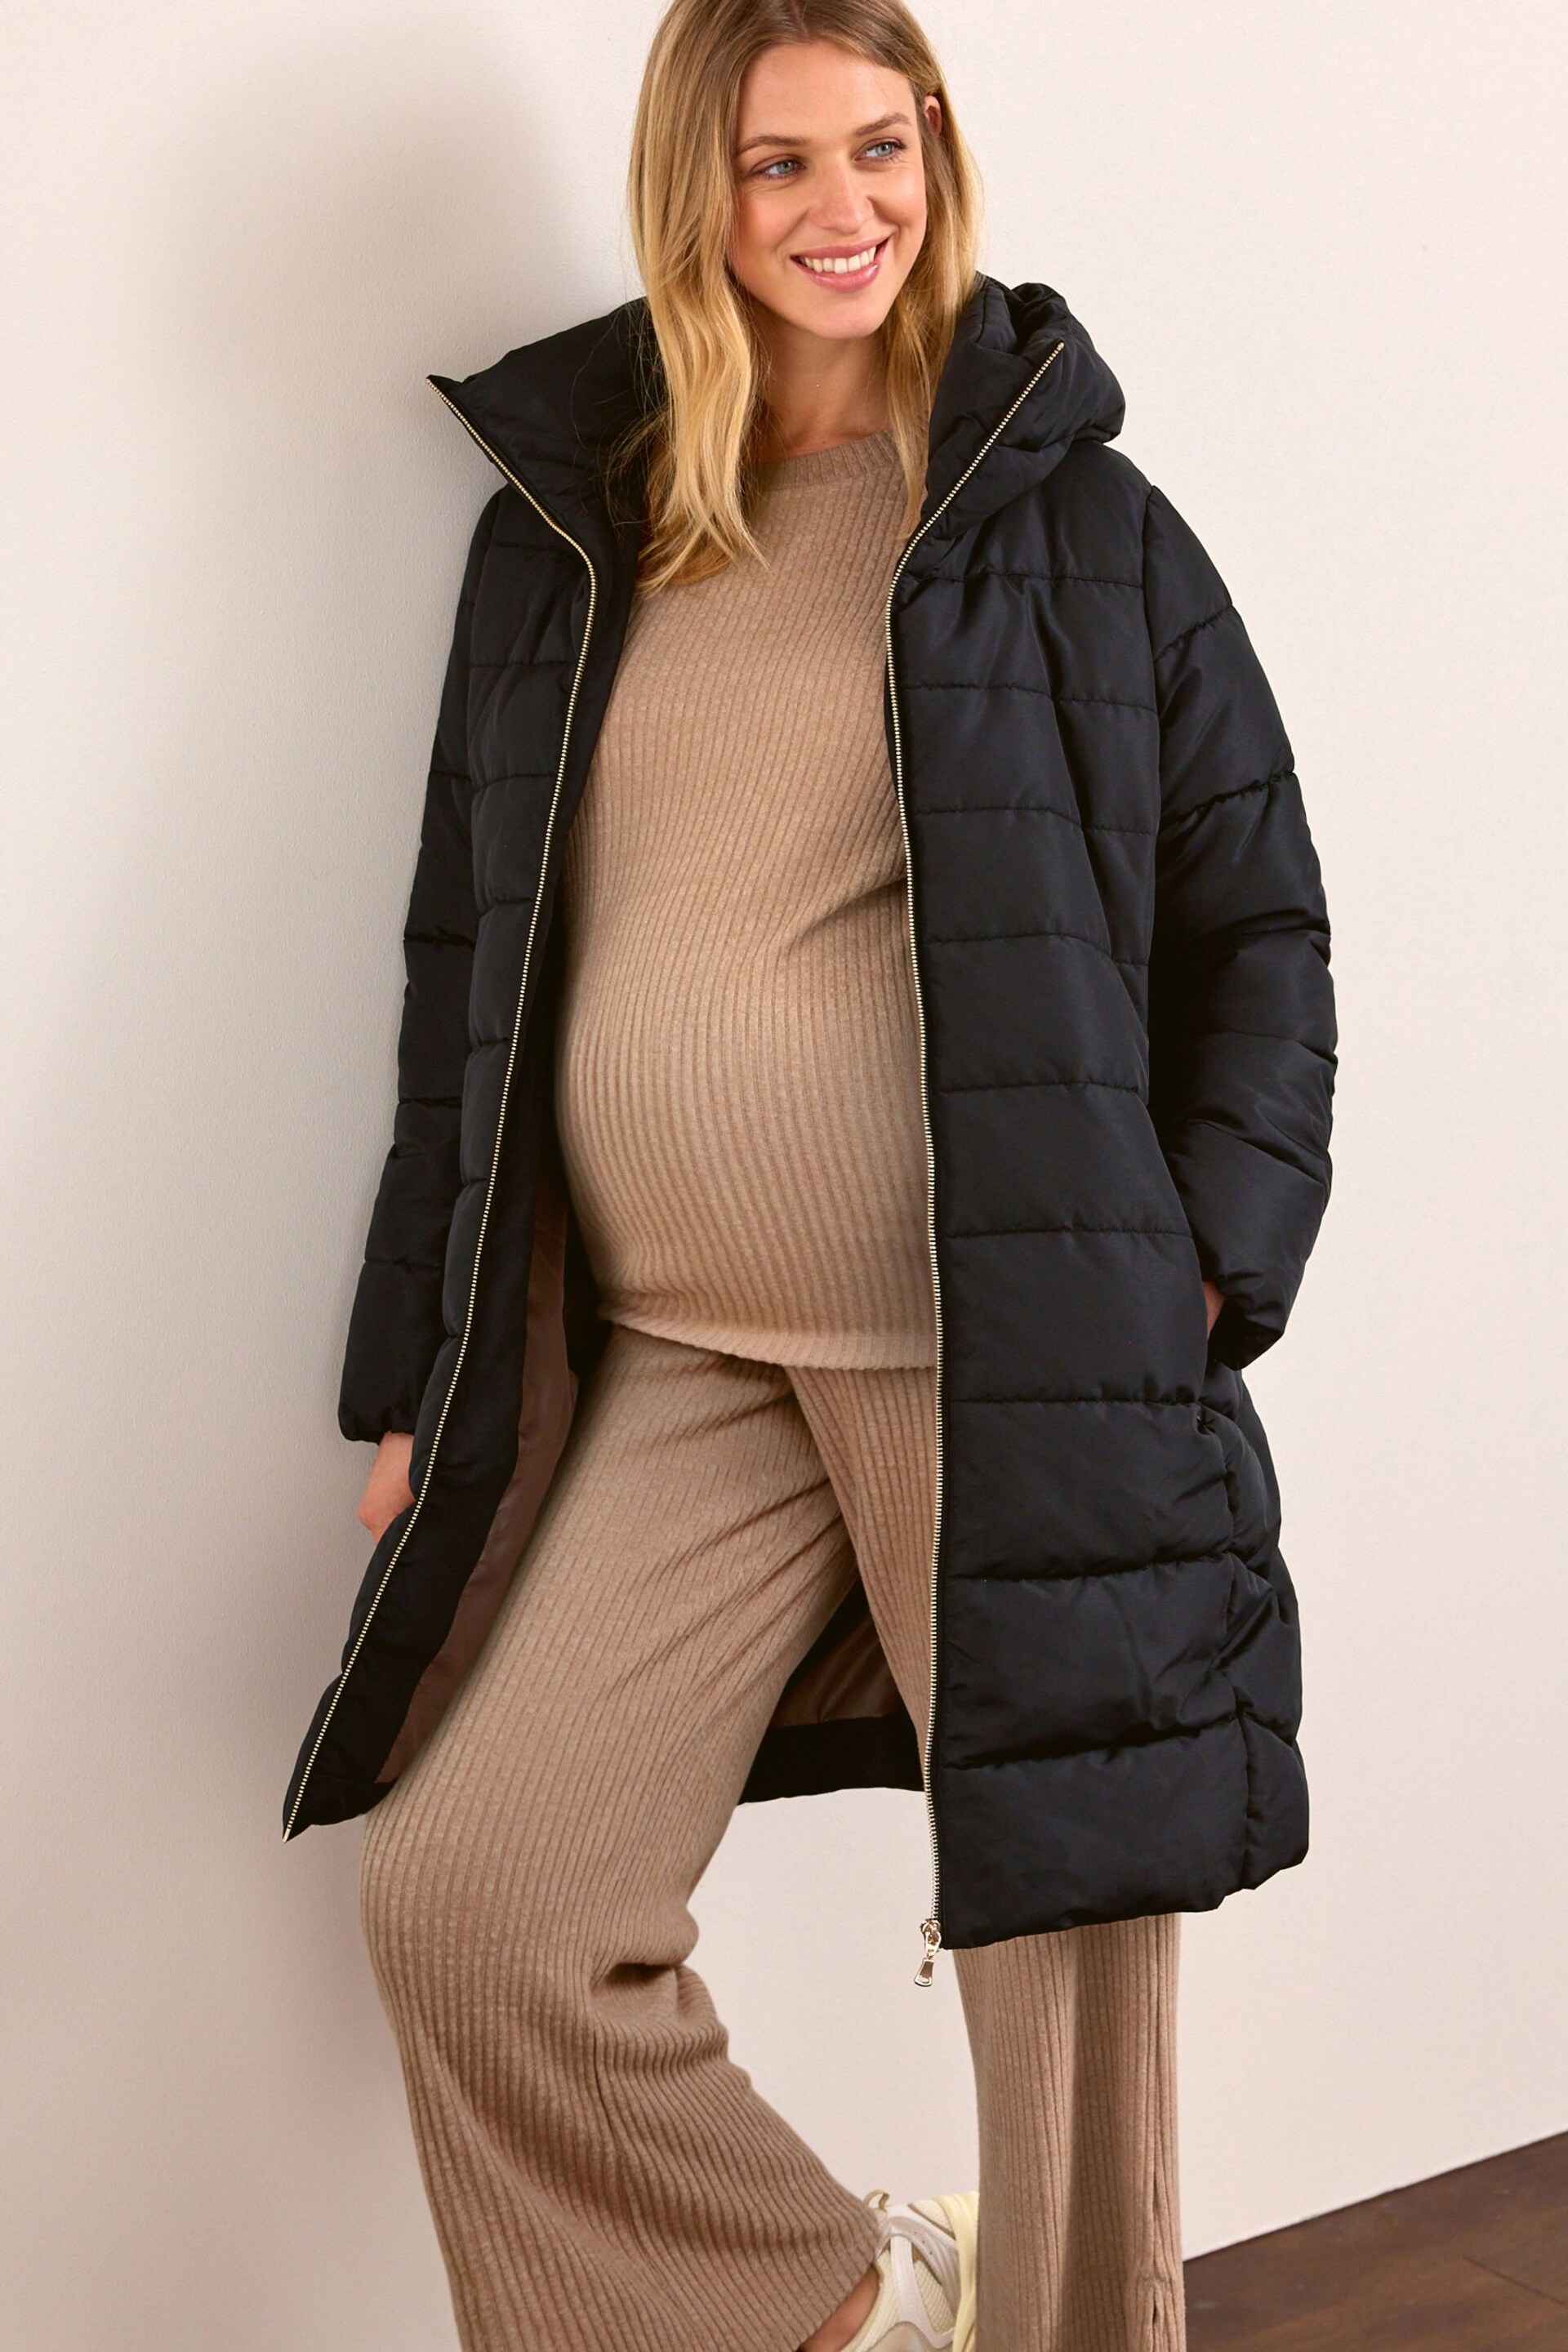 Black Maternity Padded Coat With Zip-Out Panel - Image 1 of 5